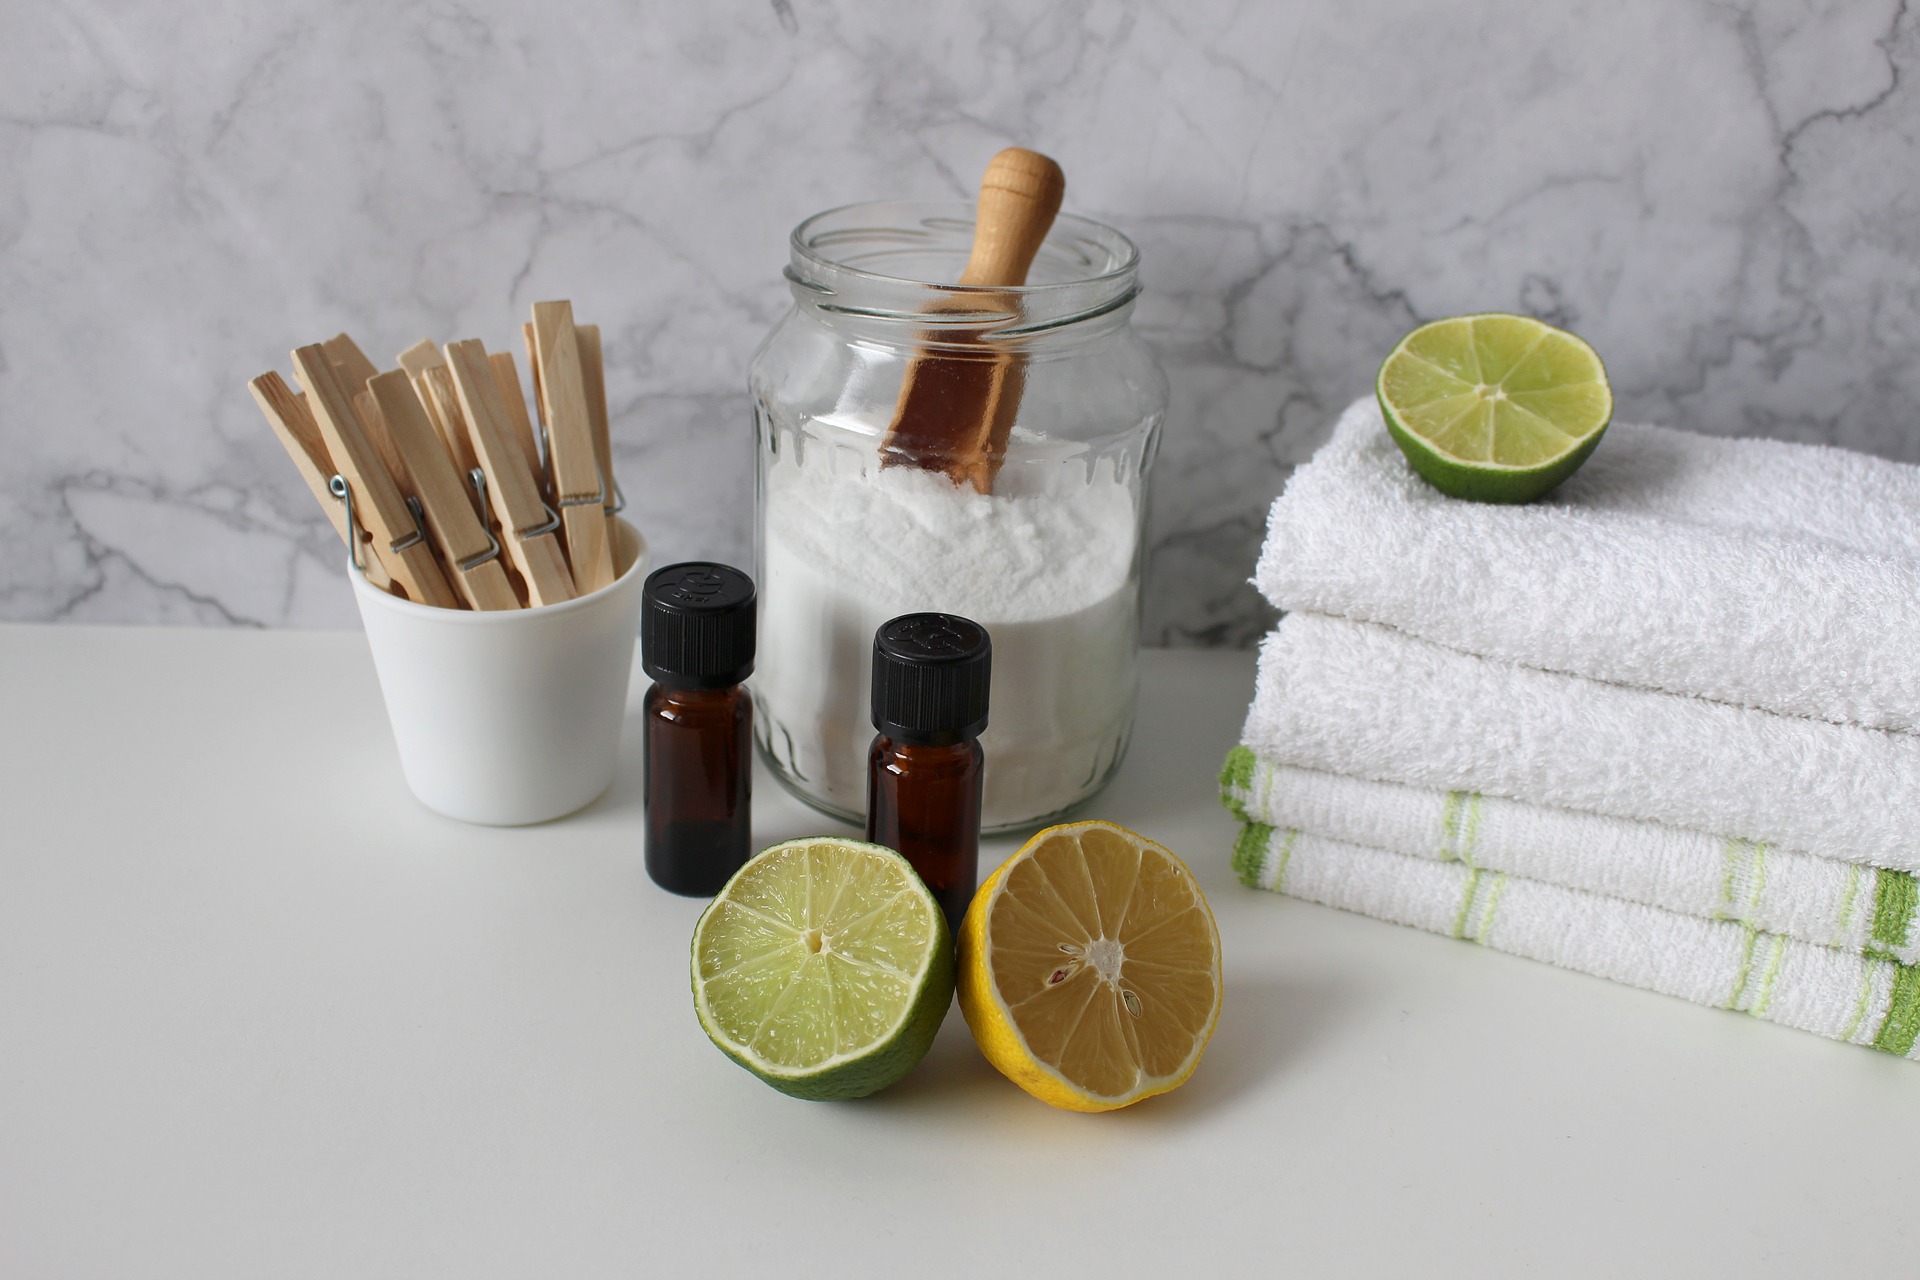 Glass jar of laundry powder with essential oils and bowl of clothes pins